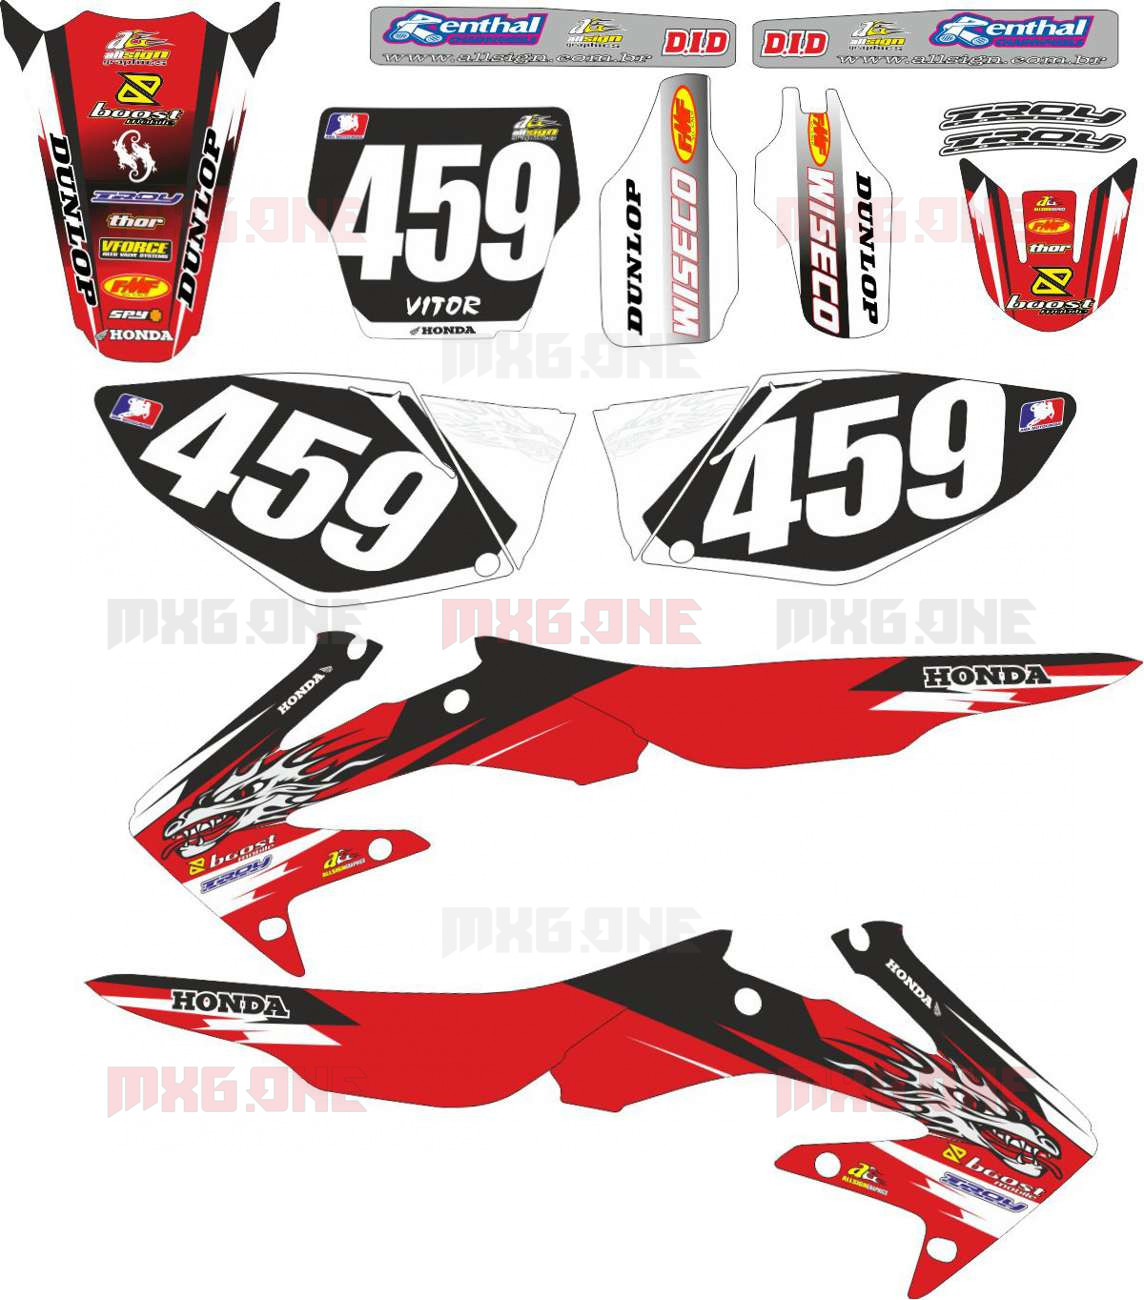 honda big red decal set quality printed and laminated on arlon Impt Info In Des